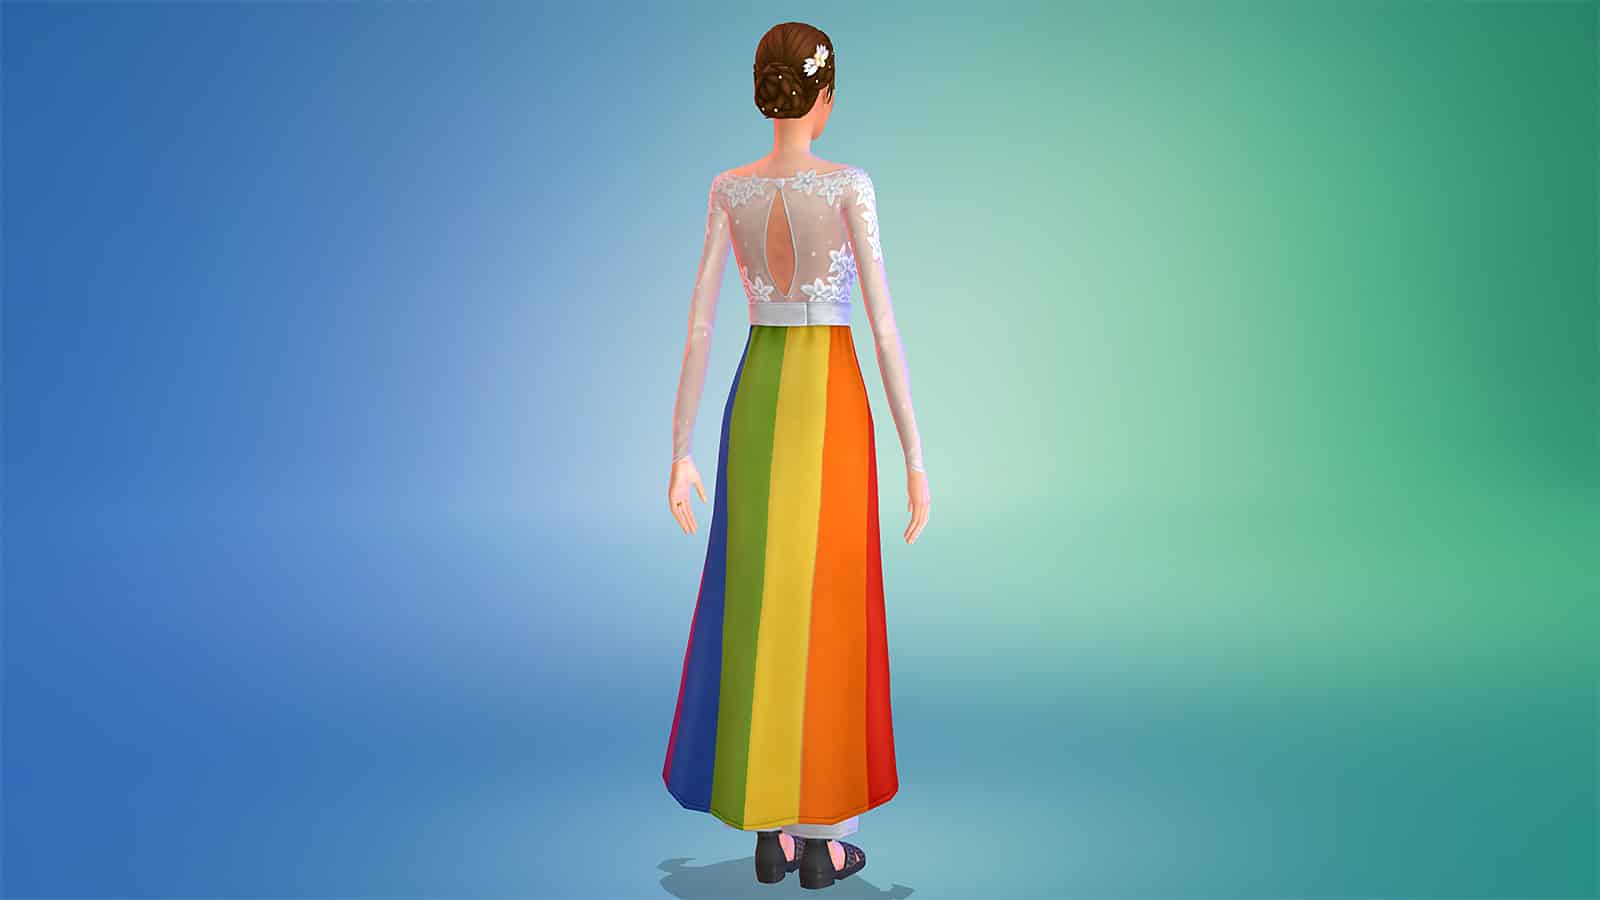 An image of a wedding dress inThe Sims 4 with a pride flag